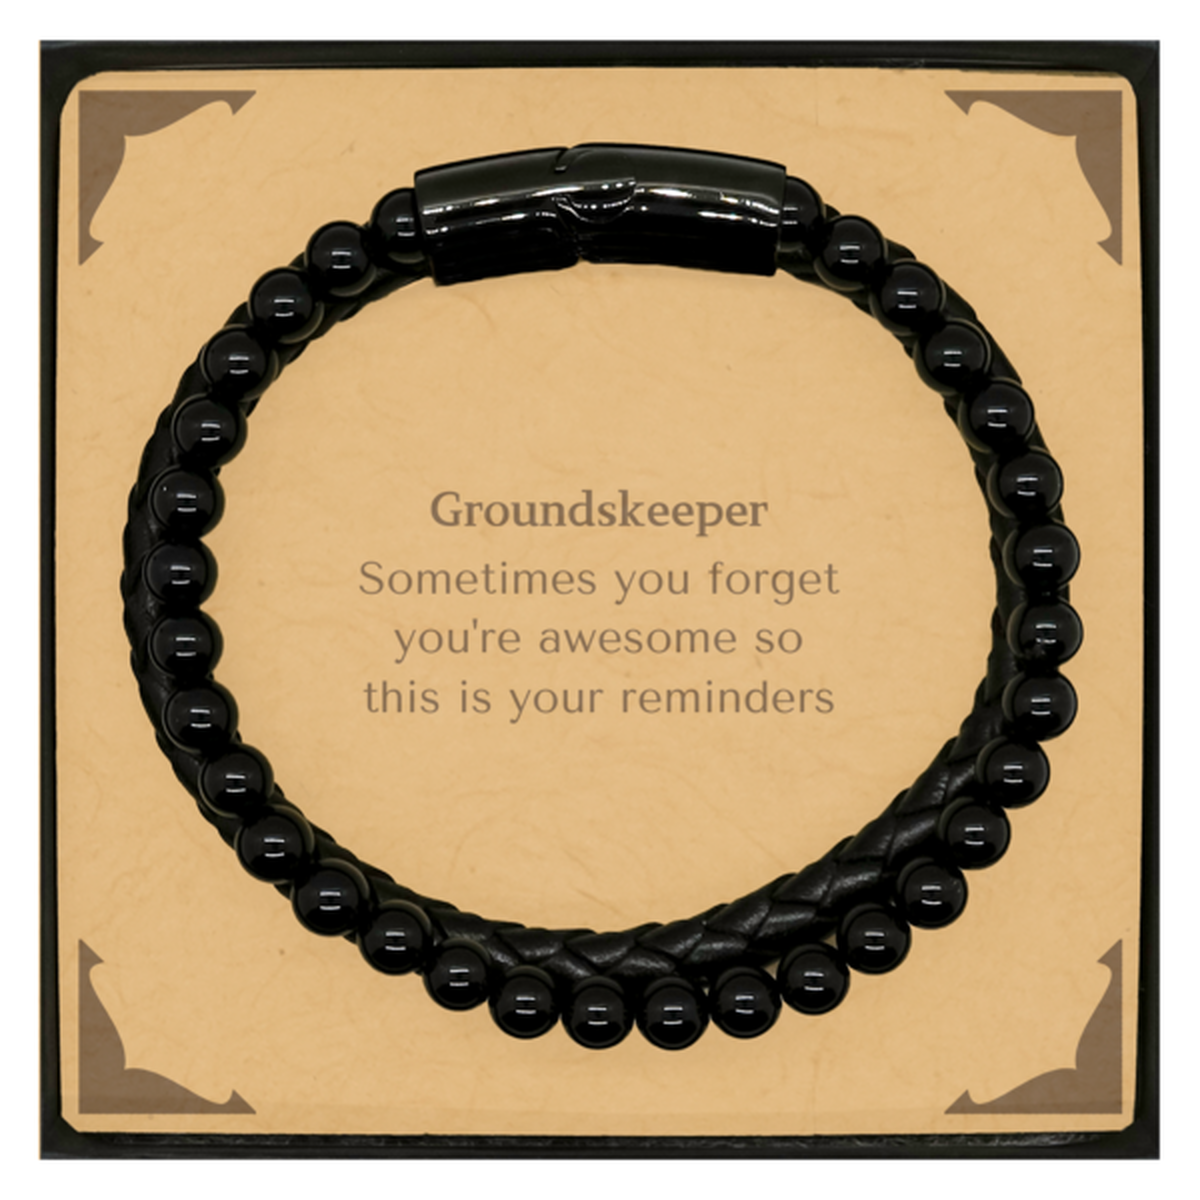 Sentimental Groundskeeper Stone Leather Bracelets, Groundskeeper Sometimes you forget you're awesome so this is your reminders, Graduation Christmas Birthday Gifts for Groundskeeper, Men, Women, Coworkers